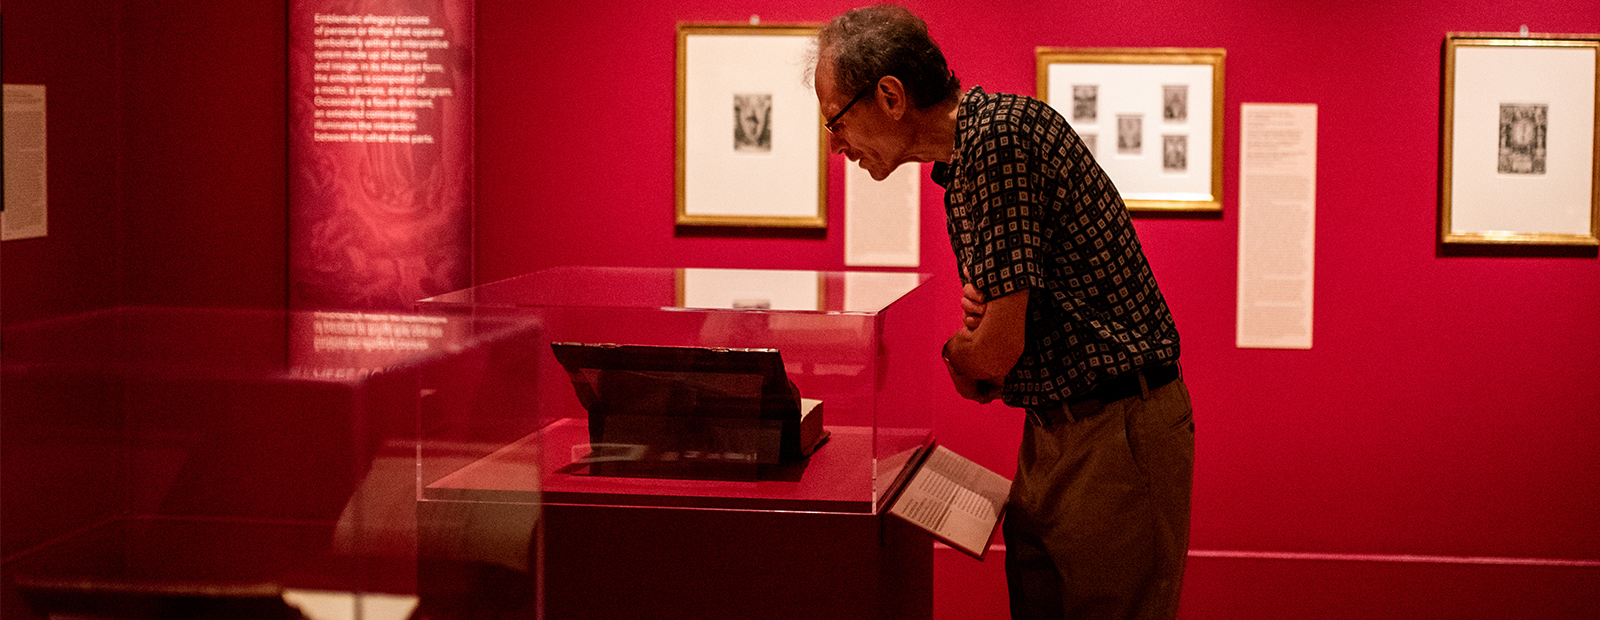 Man looks at a book in exhibition